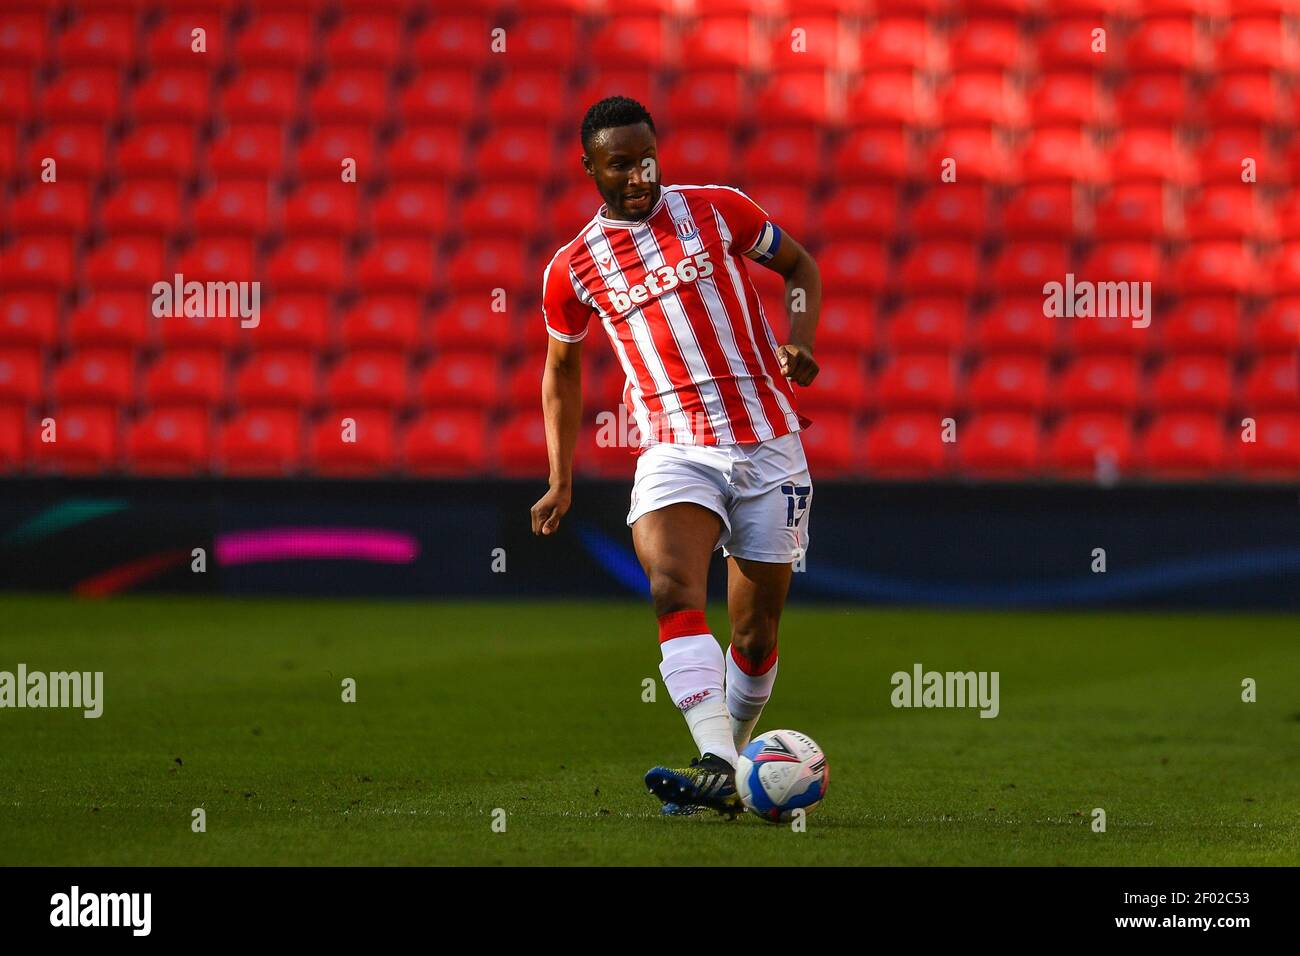 Mikel John Obi #13 of Stoke City in action during the game in, on 3/6/2021. (Photo by Craig Thomas/News Images/Sipa USA) Credit: Sipa USA/Alamy Live News Stock Photo